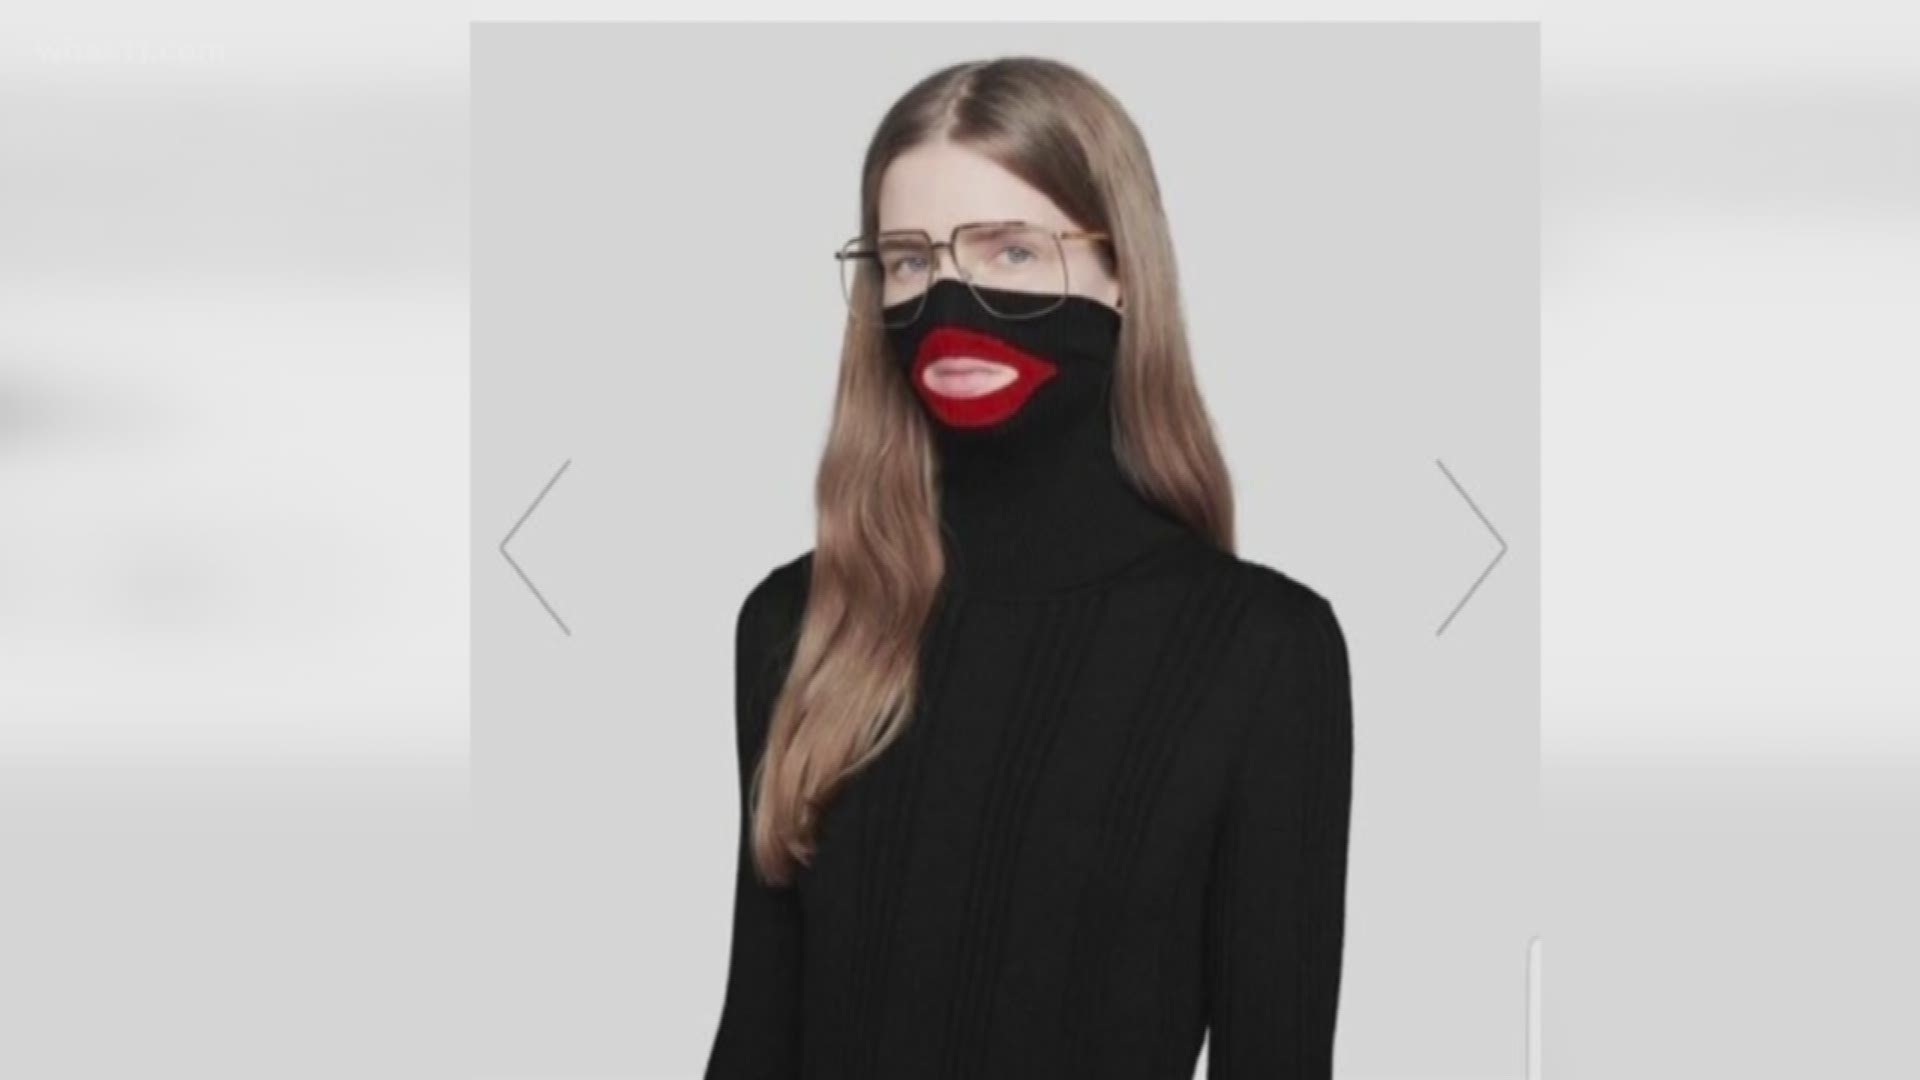 The designer pulled the sweater from shelves after customers claimed that the design resembled blackface.